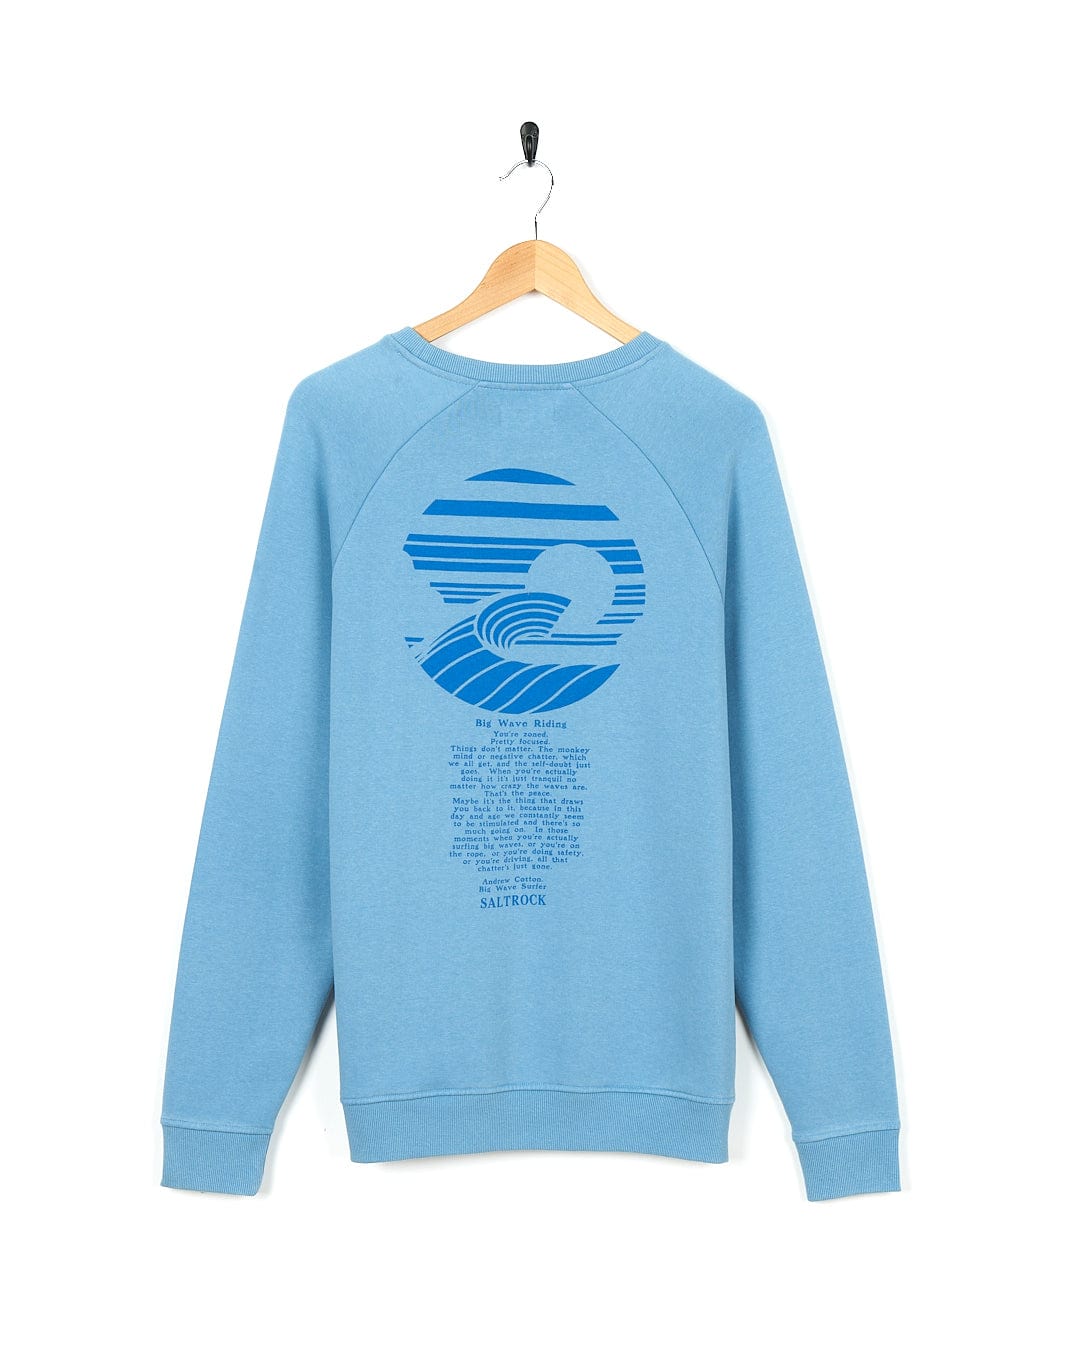 A Saltrock Atlantic - Mens Crew Sweat - Light Blue with an image of the ocean on it.